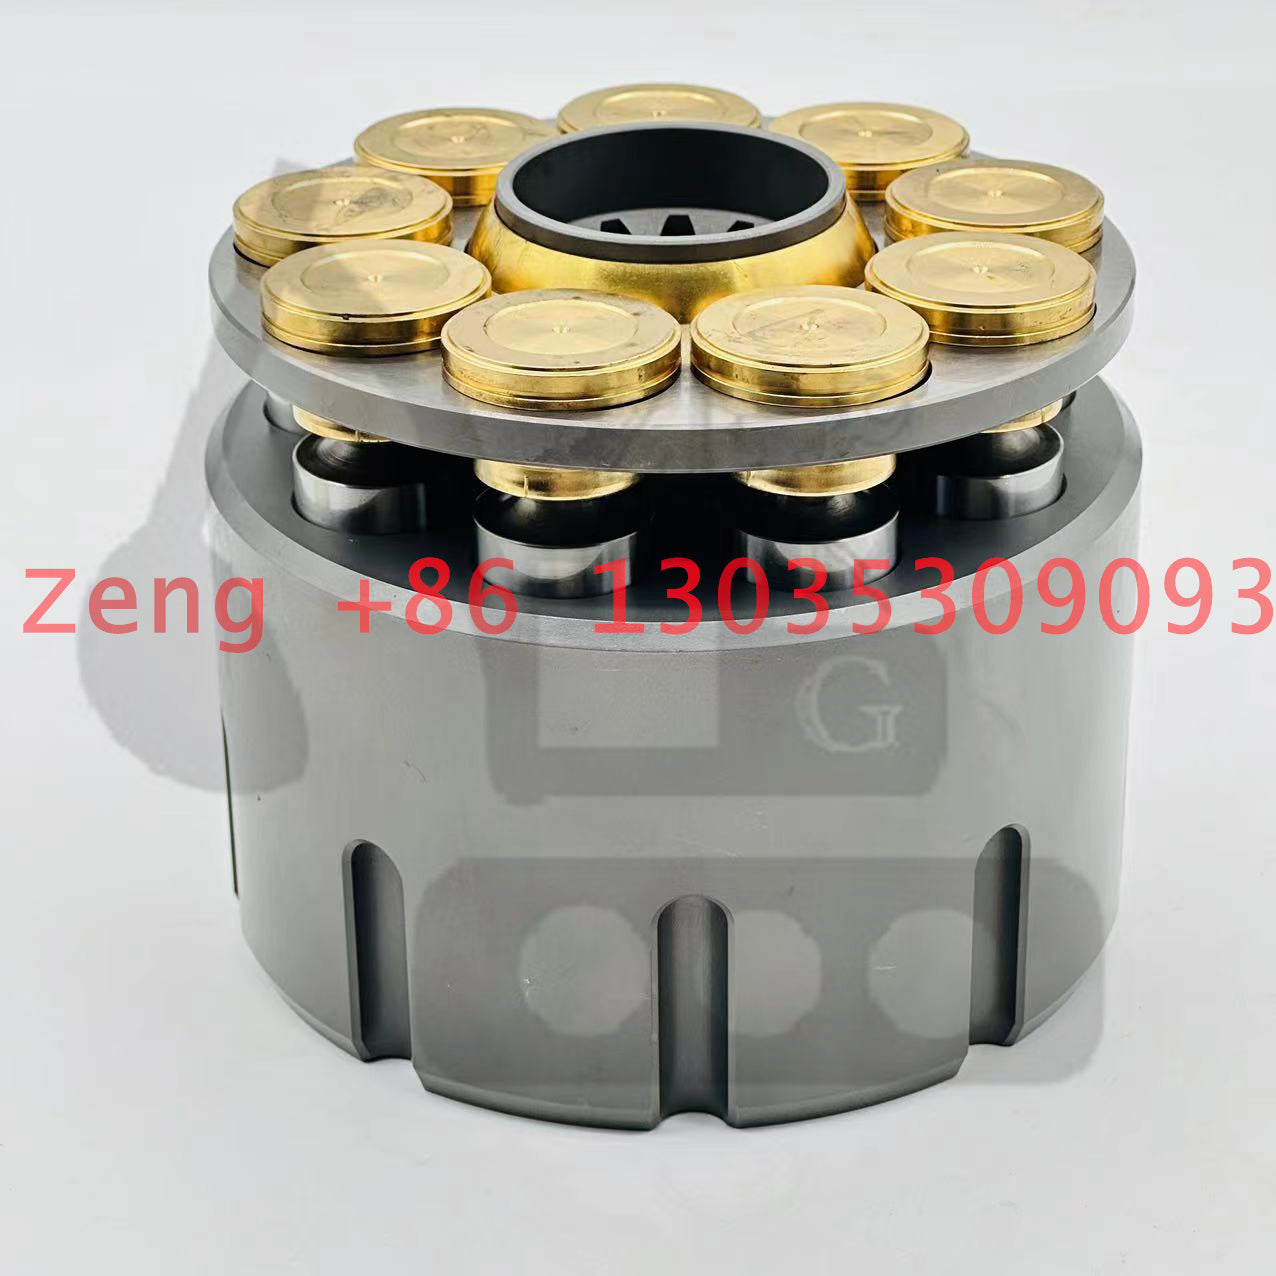 Caterpillar MCB172 hydraulic travel motor rotory group and spare parts used for Kobelco SK200-6，Komatsu PC200-7，Caterpillar CAT200B CAT320B CAT320C CAT324 CAT325B  excavator